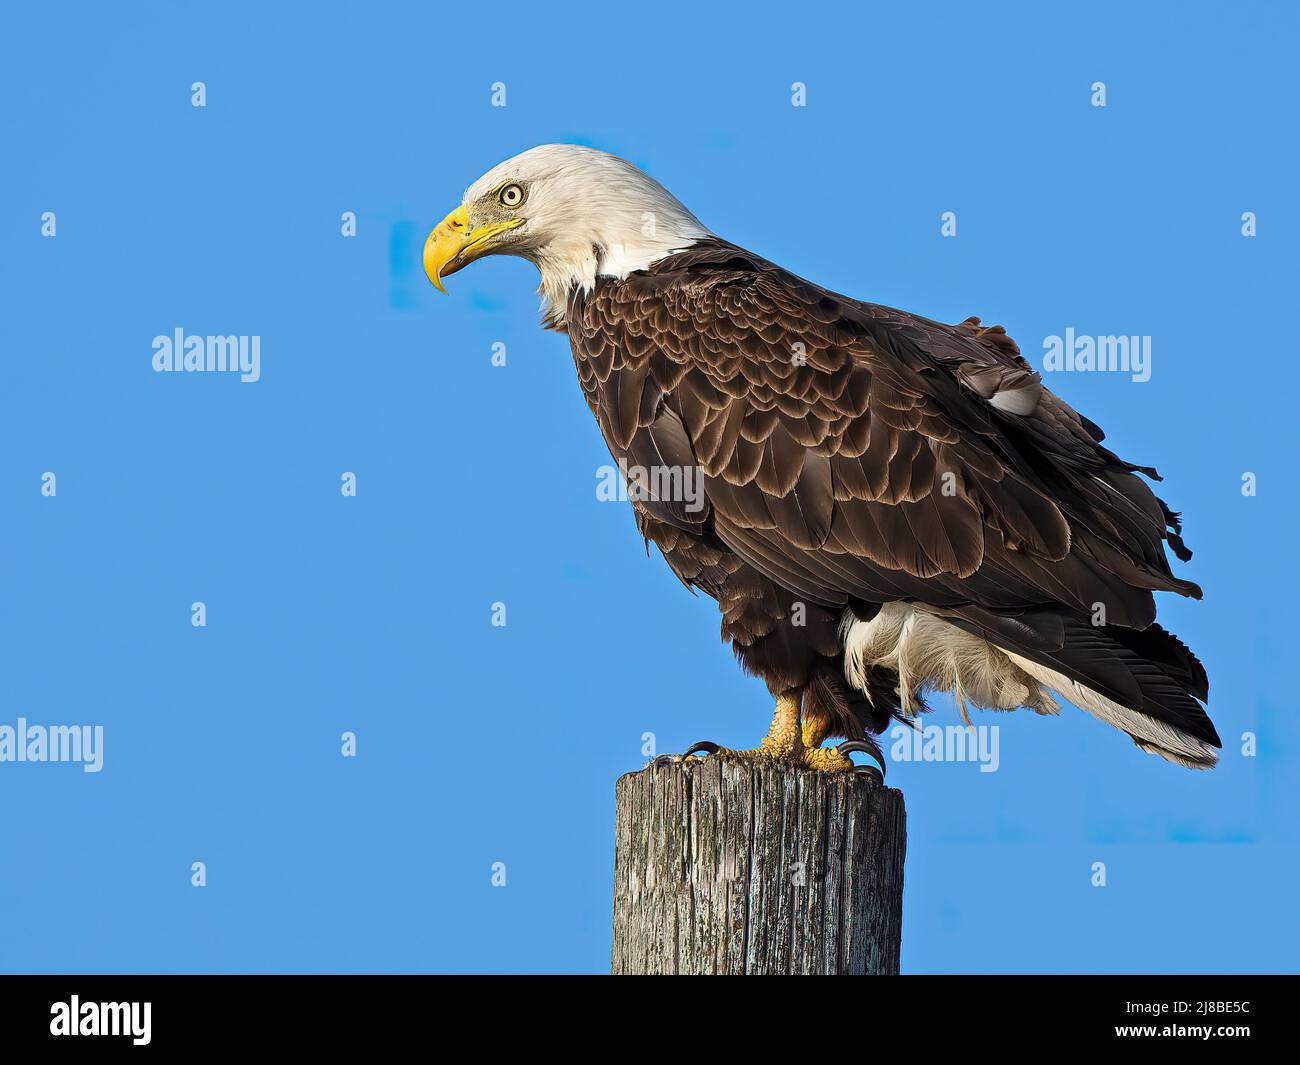 A Bald Eagle Standing on top of a Piling Stock Photo